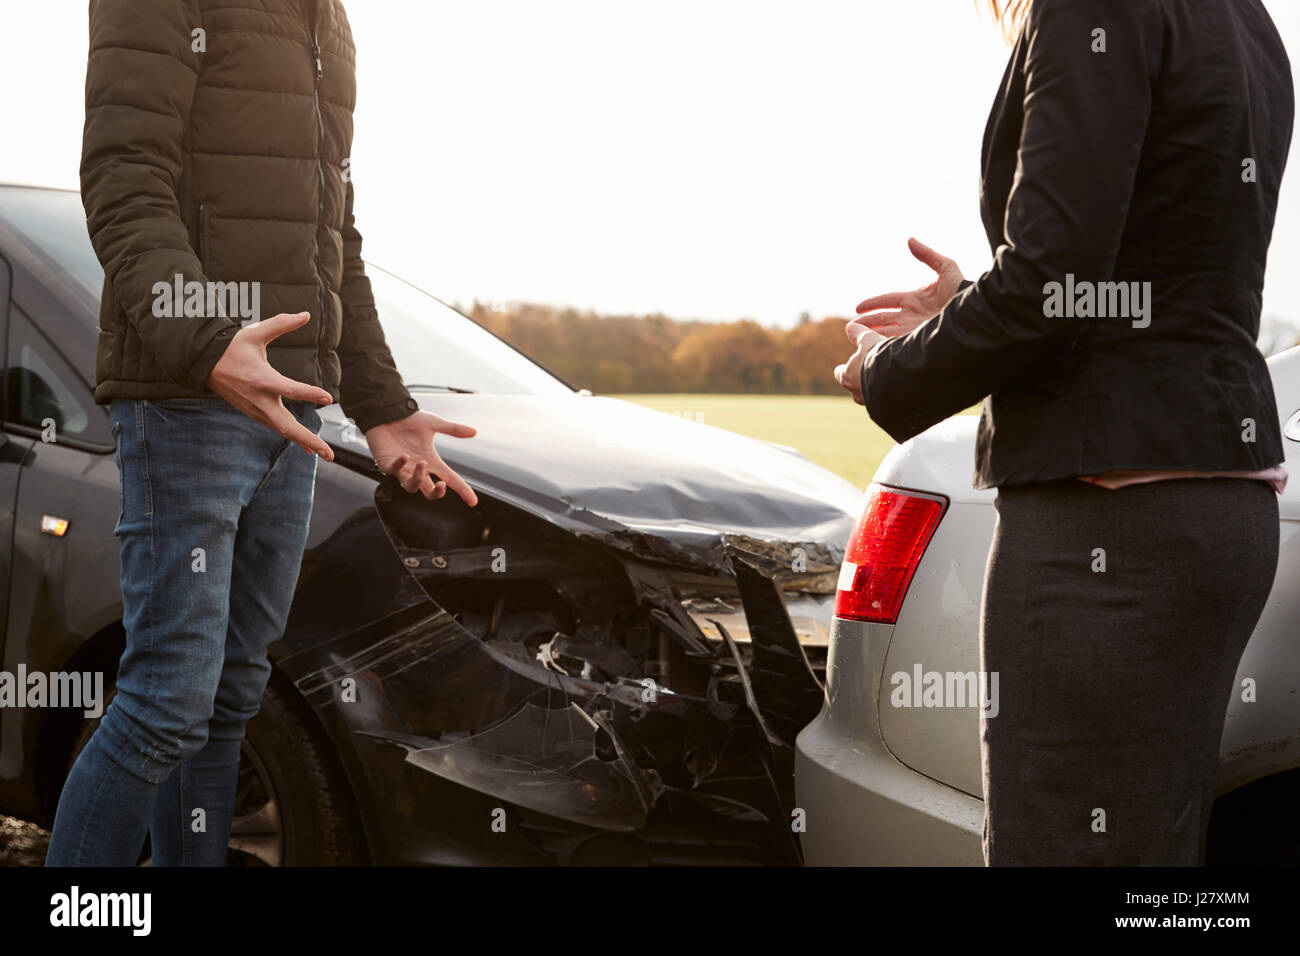 Two Drivers Arguing Over Damage To Cars After Accident Stock Photo